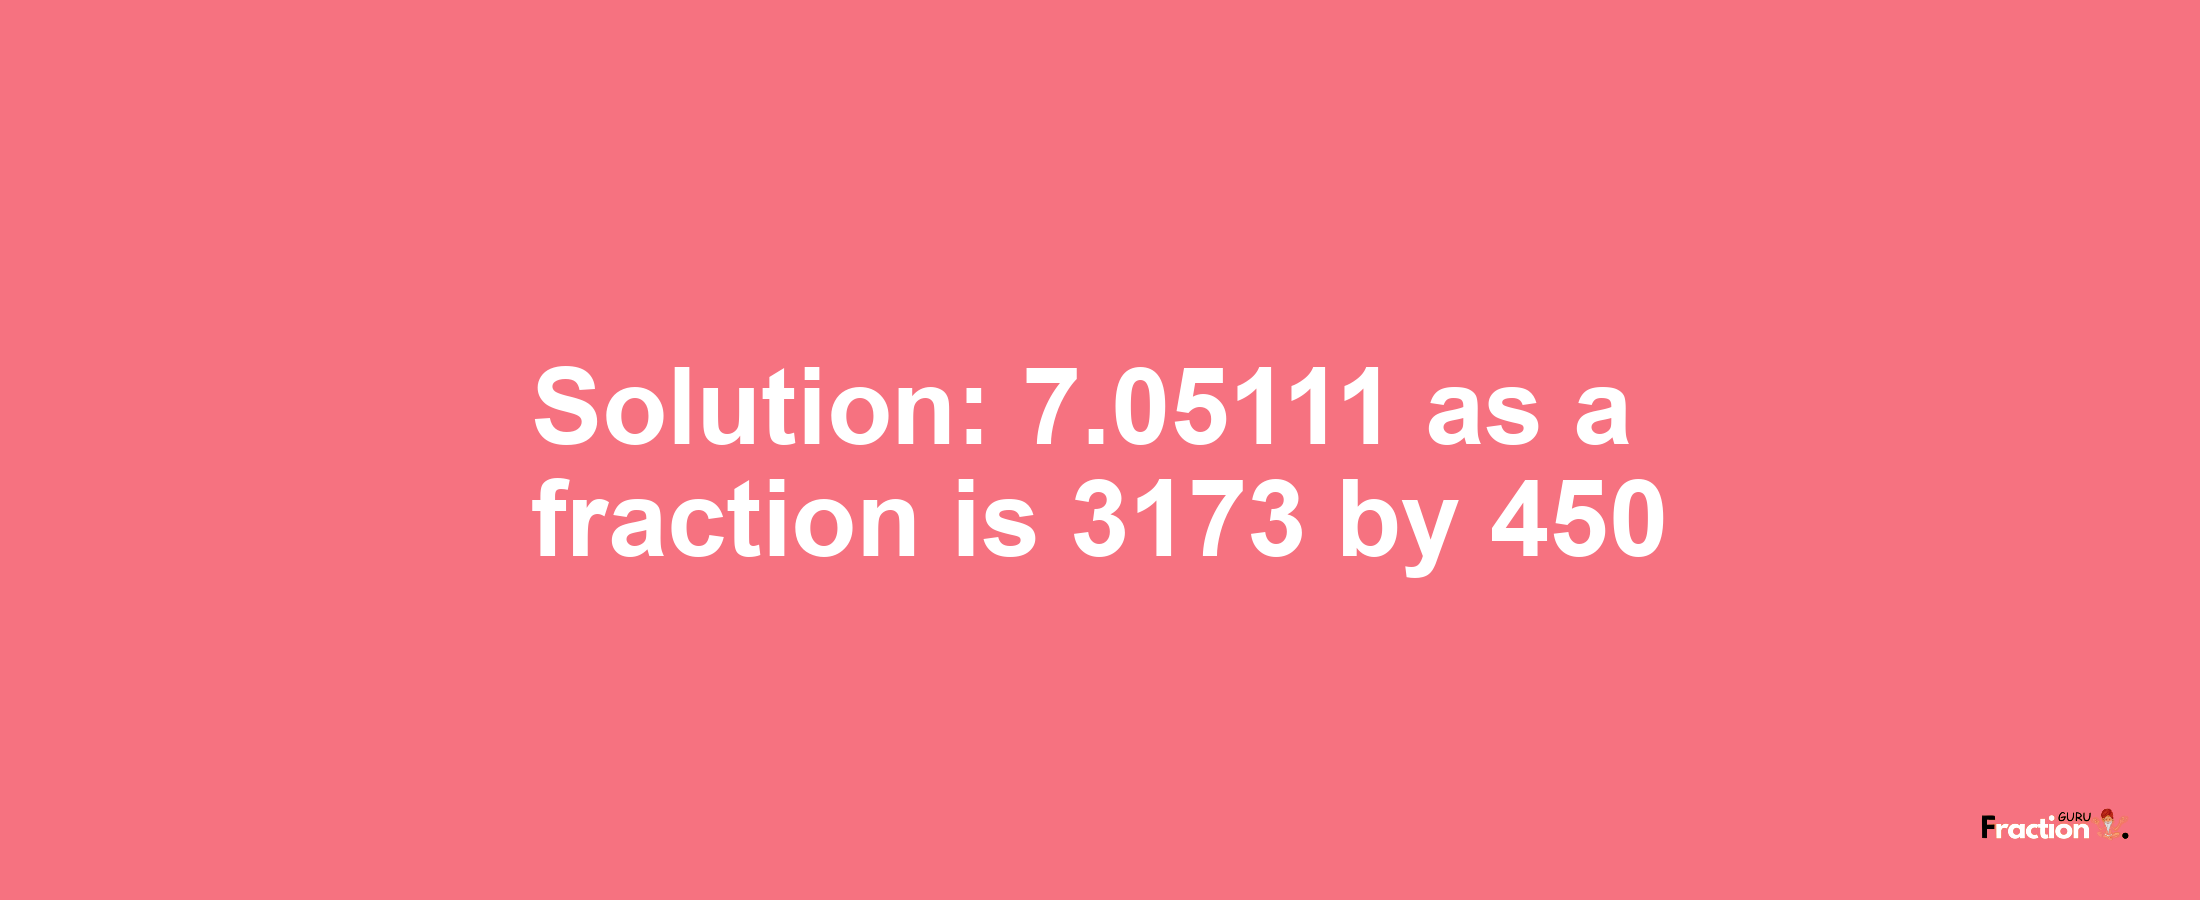 Solution:7.05111 as a fraction is 3173/450